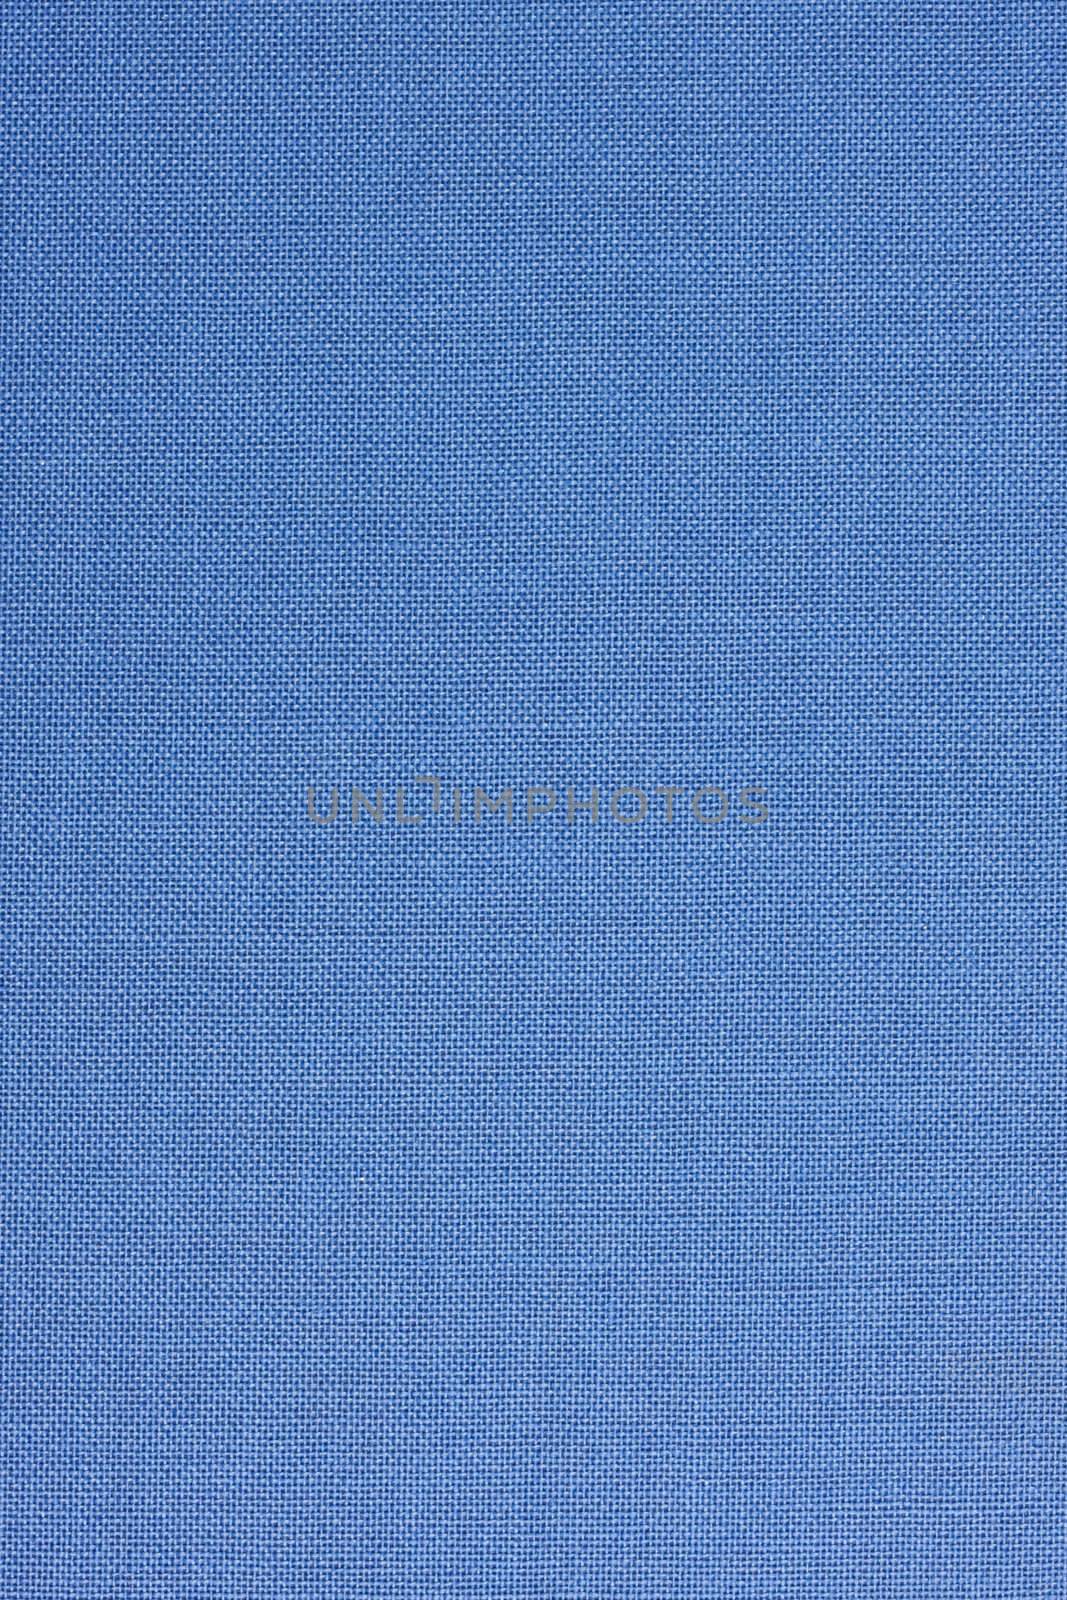 blue textile background from 1960s book cover